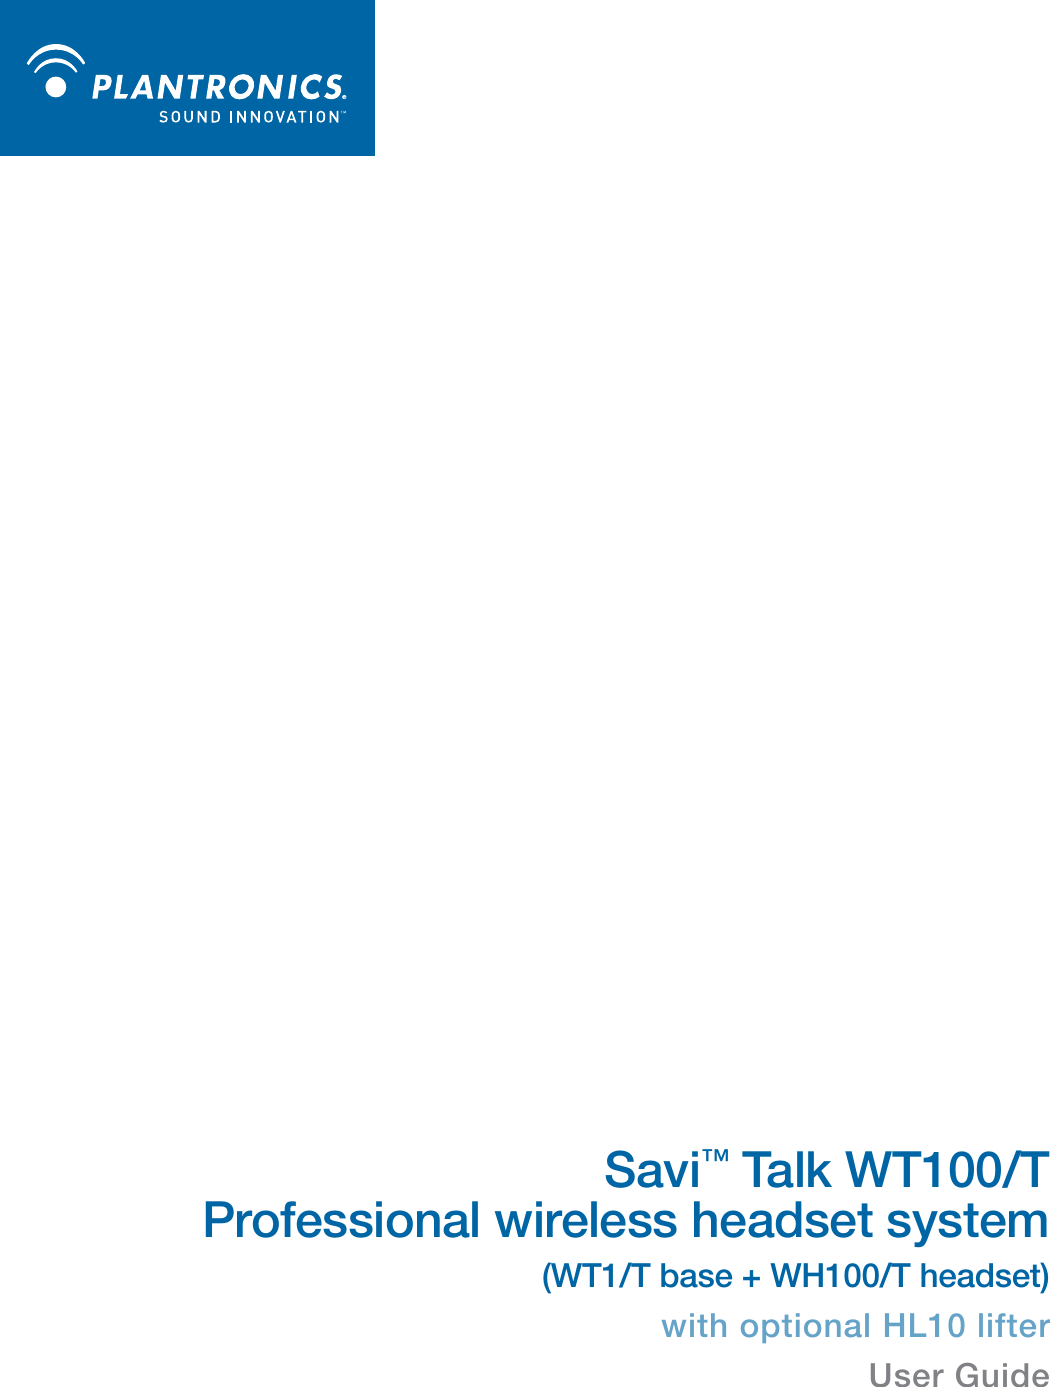 Savi™ Talk WT100/T Professional wireless headset system (WT1/T base + WH100/T headset)with optional HL10 lifterUser Guide